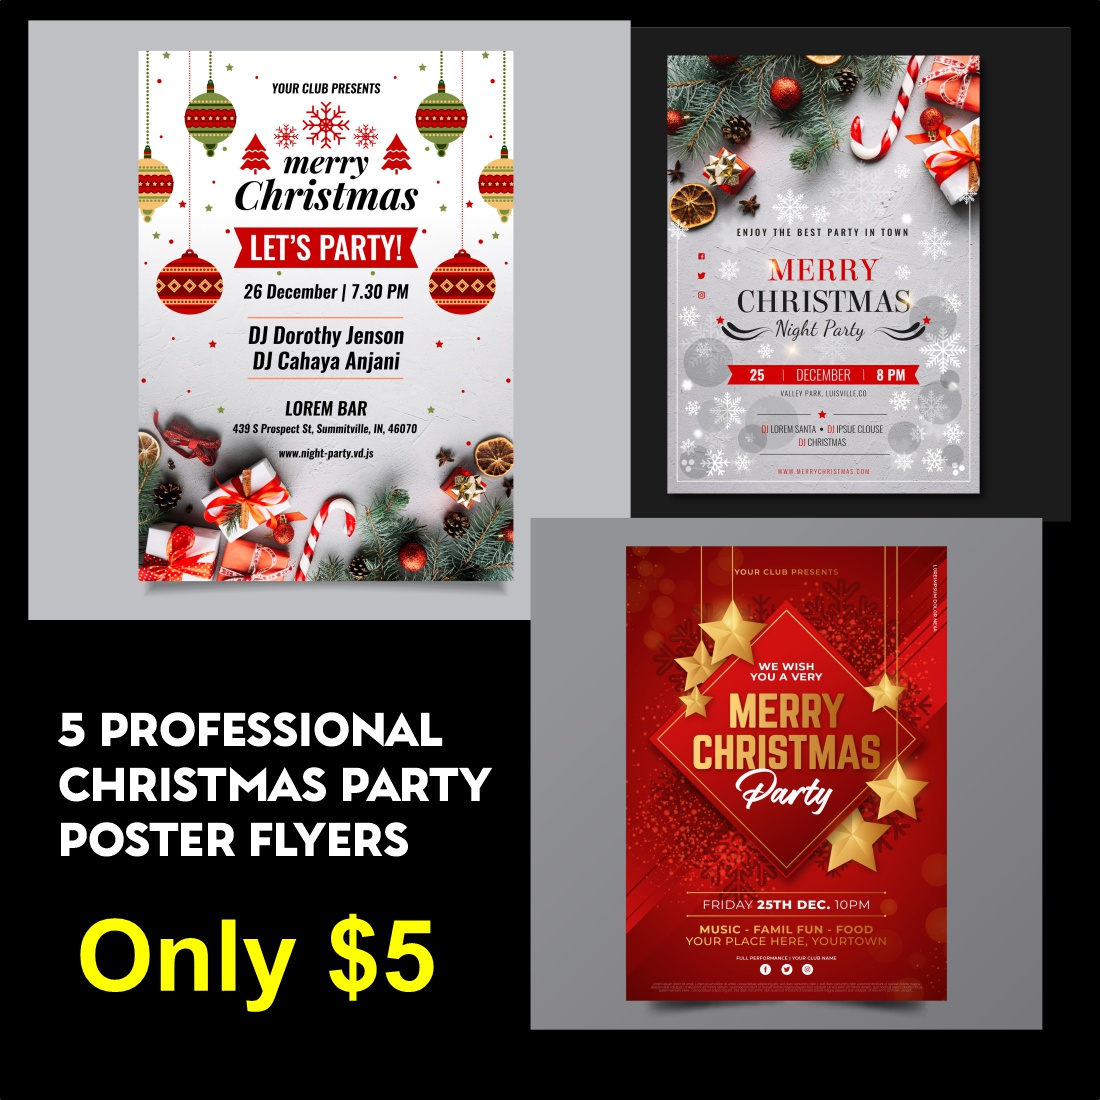 Christmas Party Poster Flyer Templates cover image.